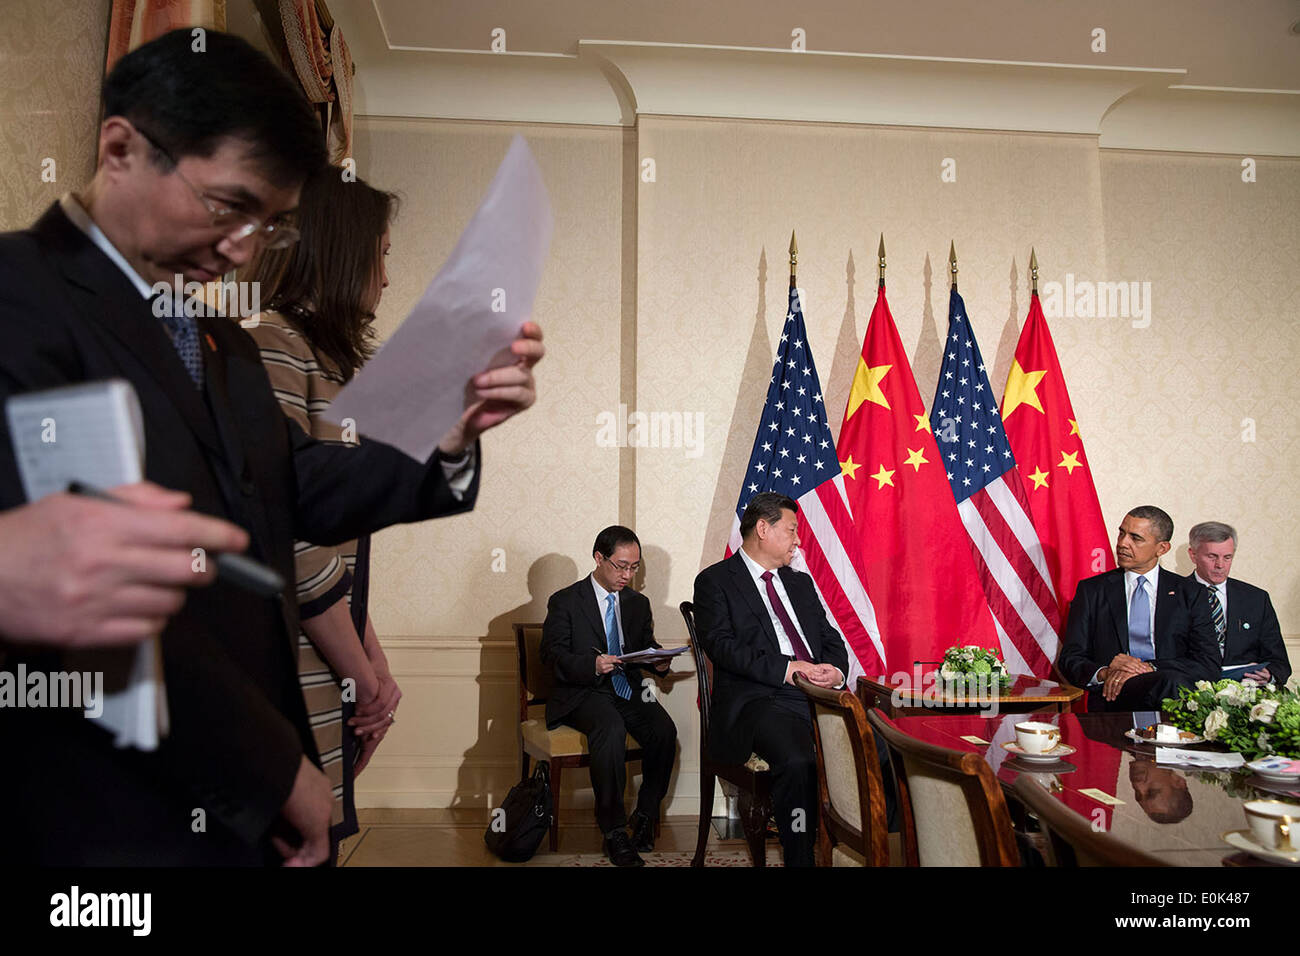 US President Barack Obama holds a bilateral meeting with President Xi Jinping of China at the U.S. Ambassador's residence March 24, 2014 in The Hague, Netherlands. Stock Photo